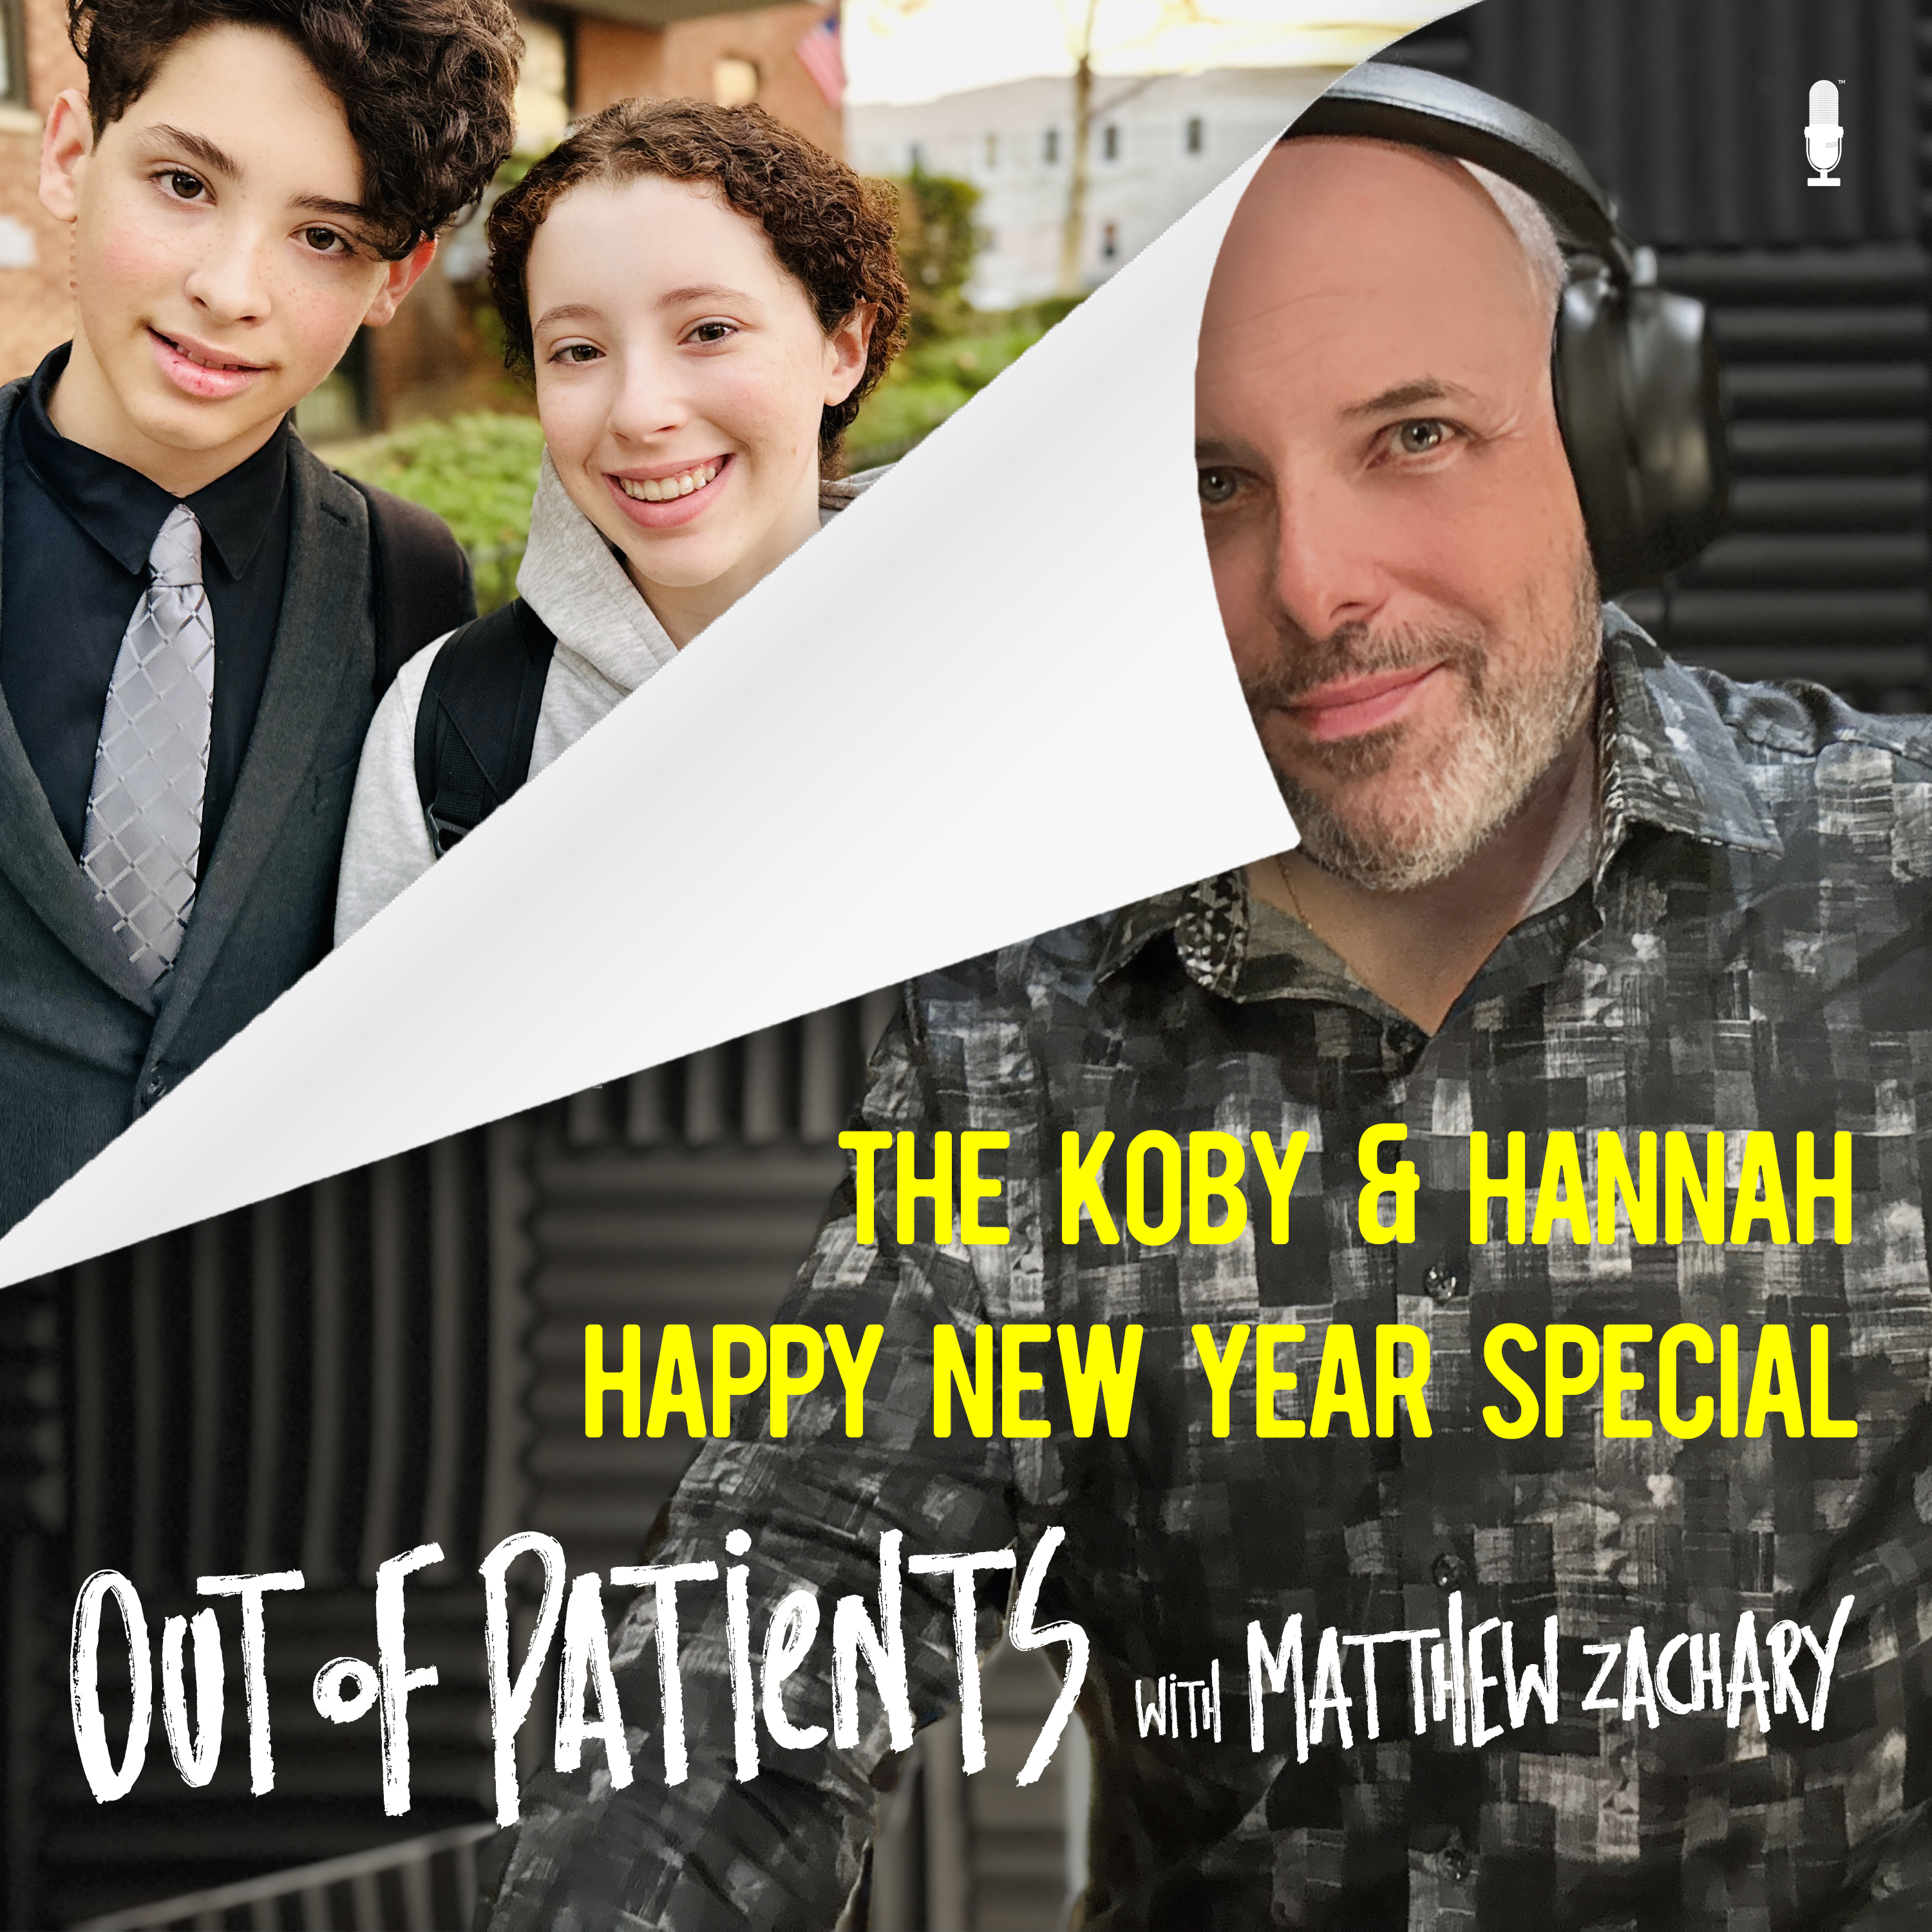 The Koby & Hannah 2024 New Year’s Special!